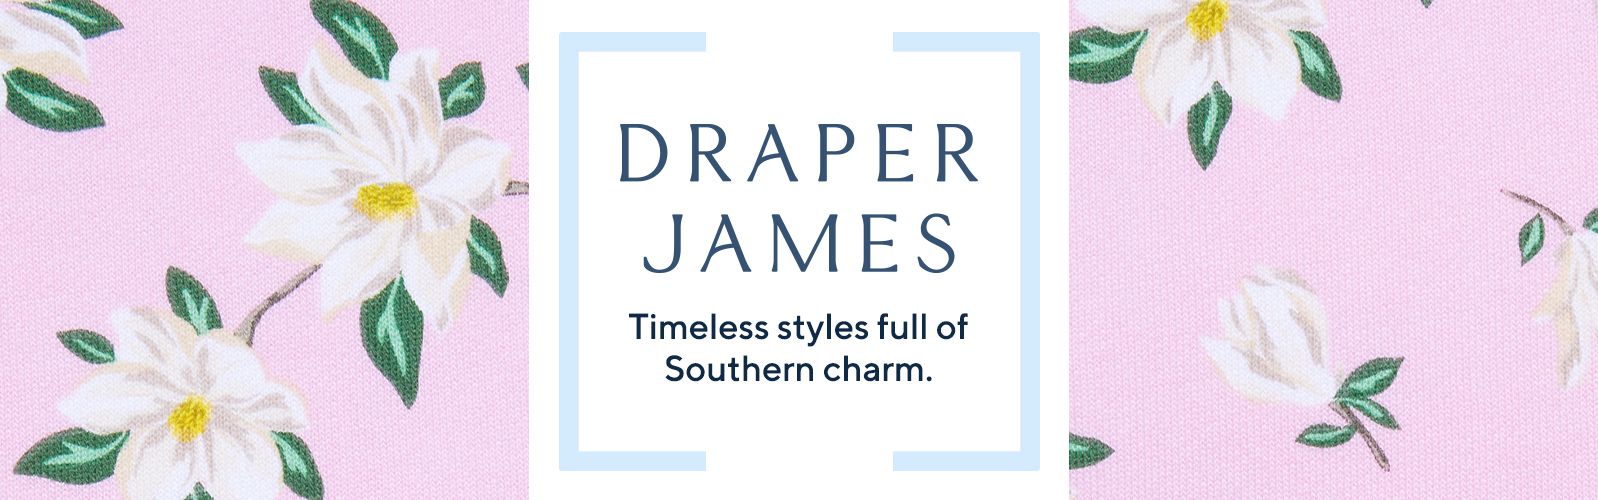 Holiday Cocktails & Fashion with Draper James - Fashionable Hostess